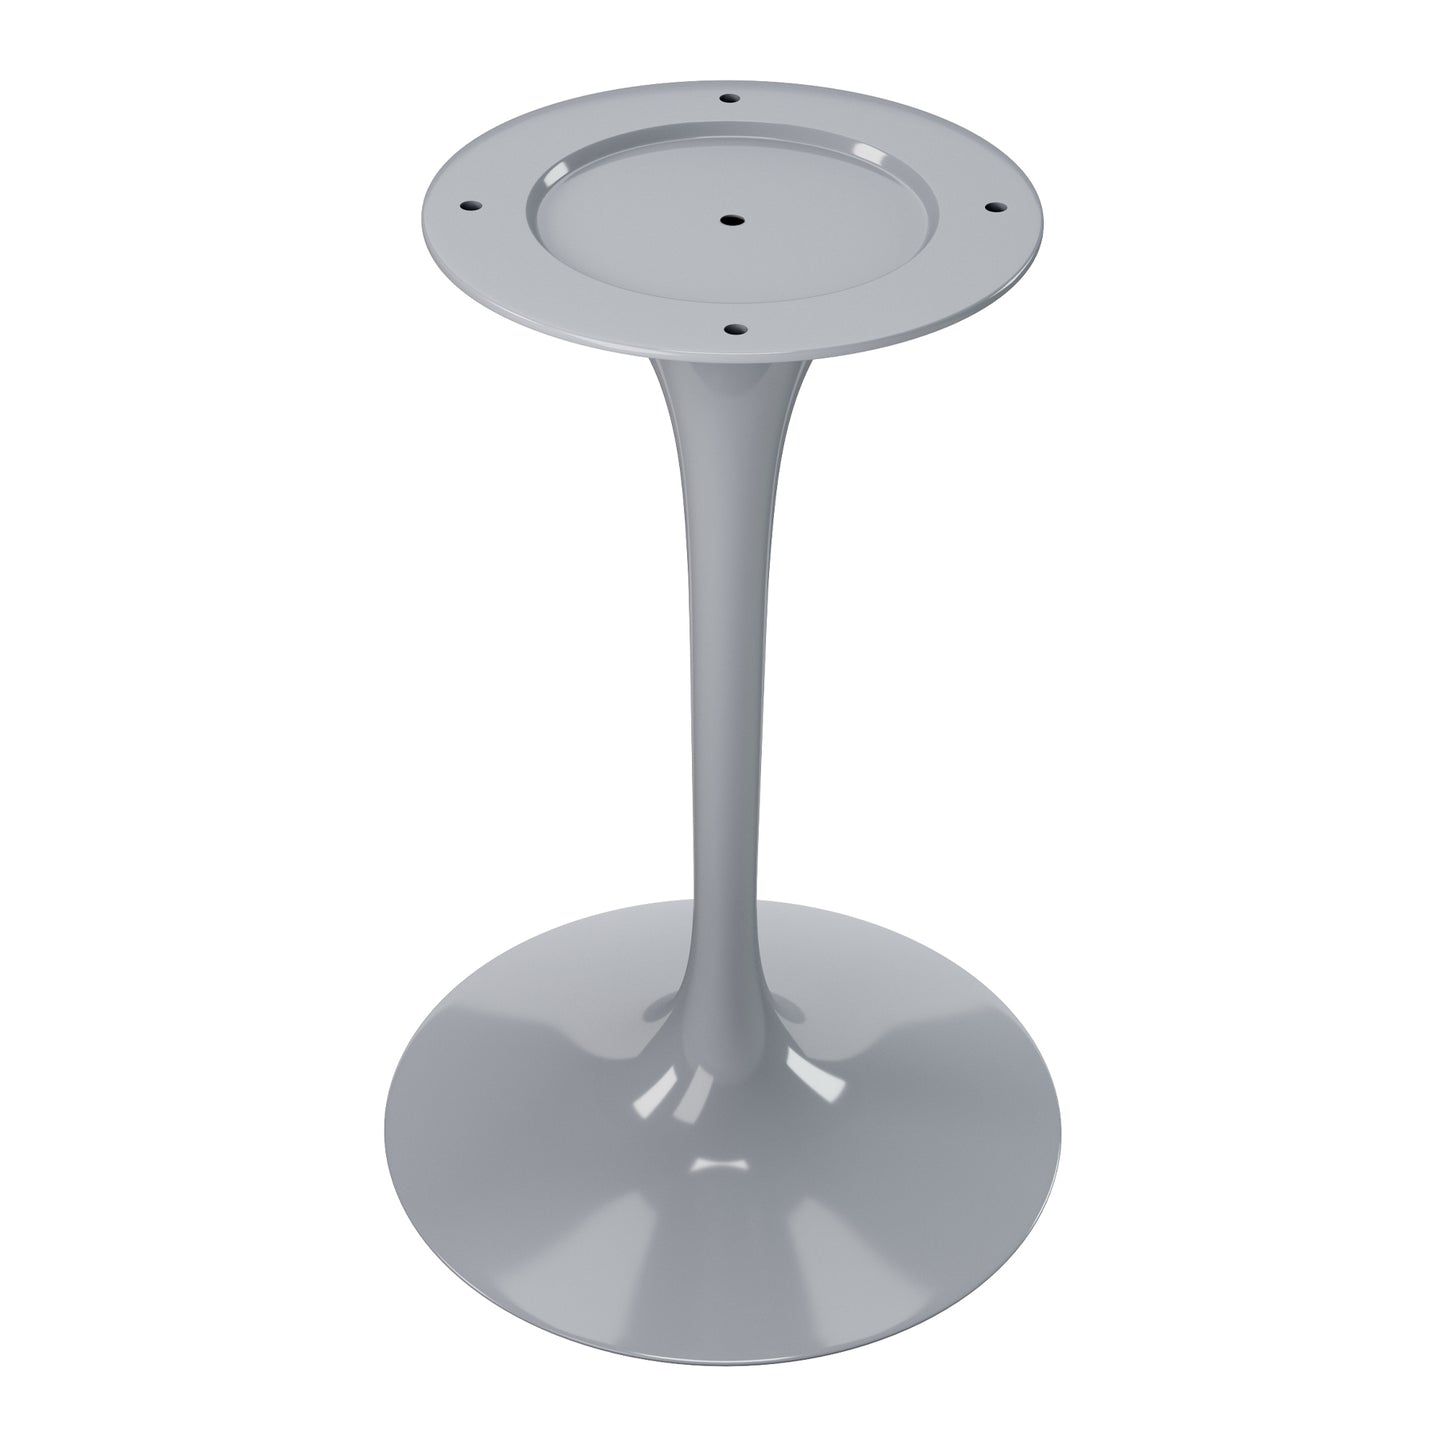 Rose 40" Round Marble Dining Table, Gray Base